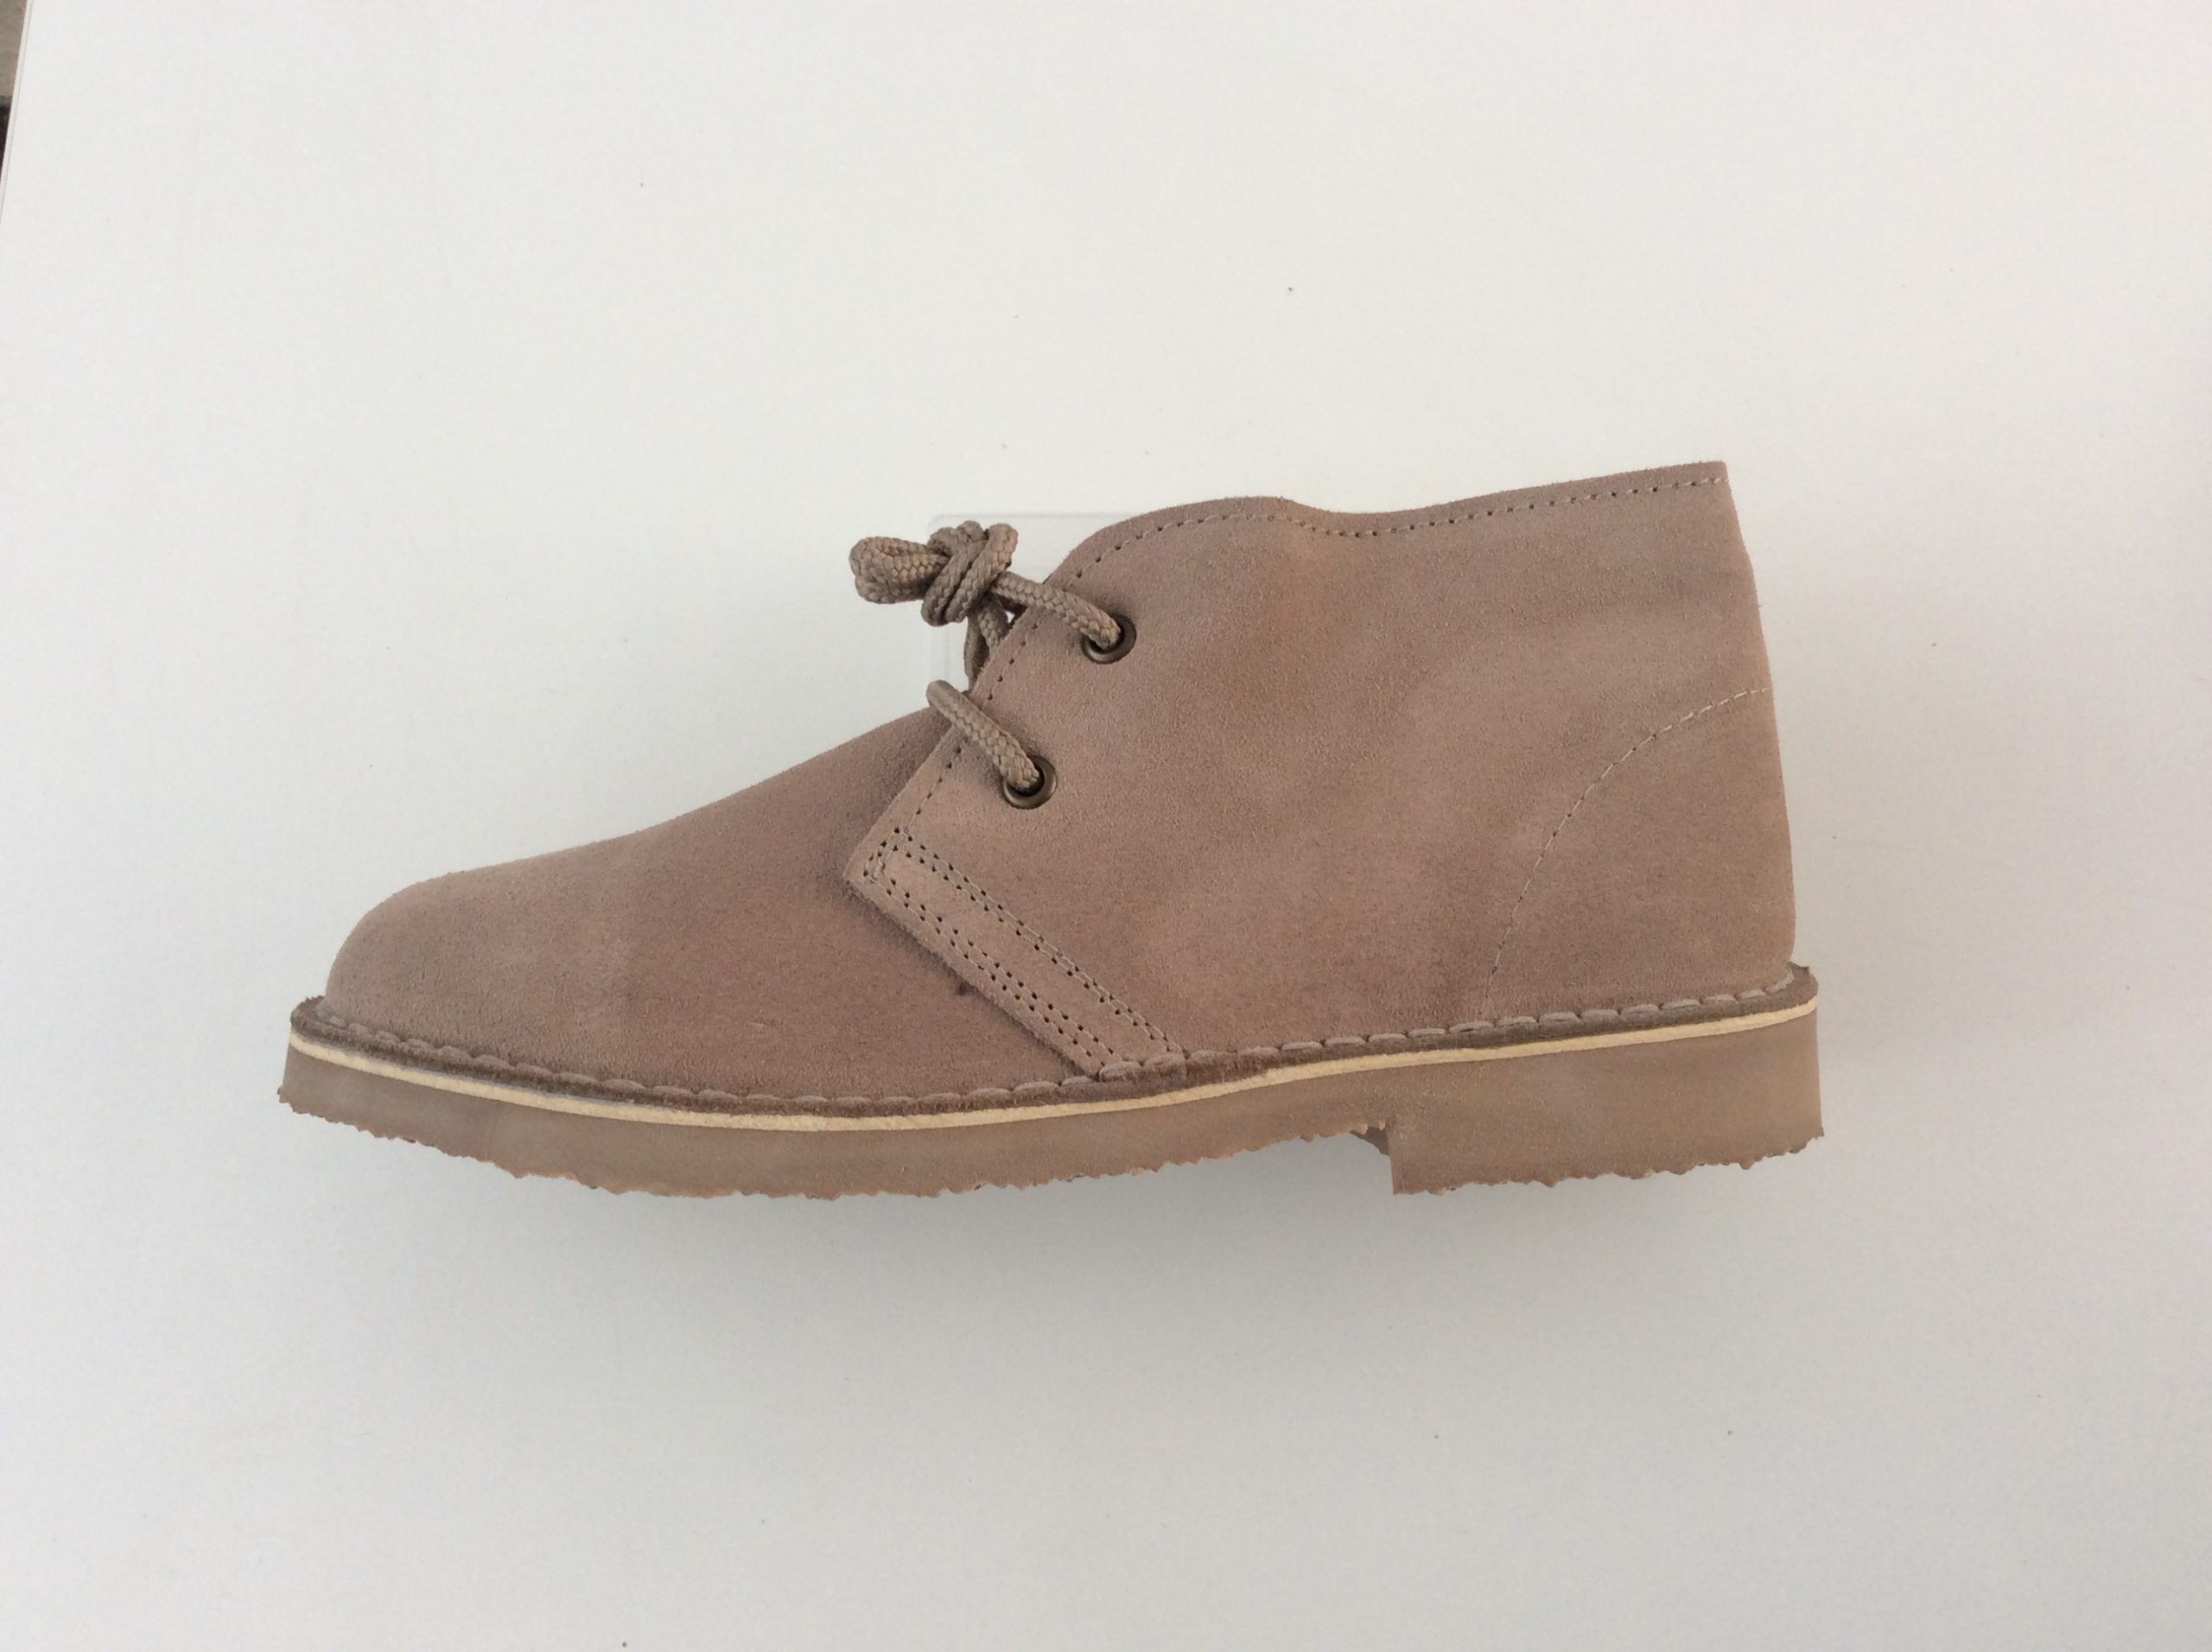 Roamers Classic Ladies Desert Boots, Light Taupe – Mod One